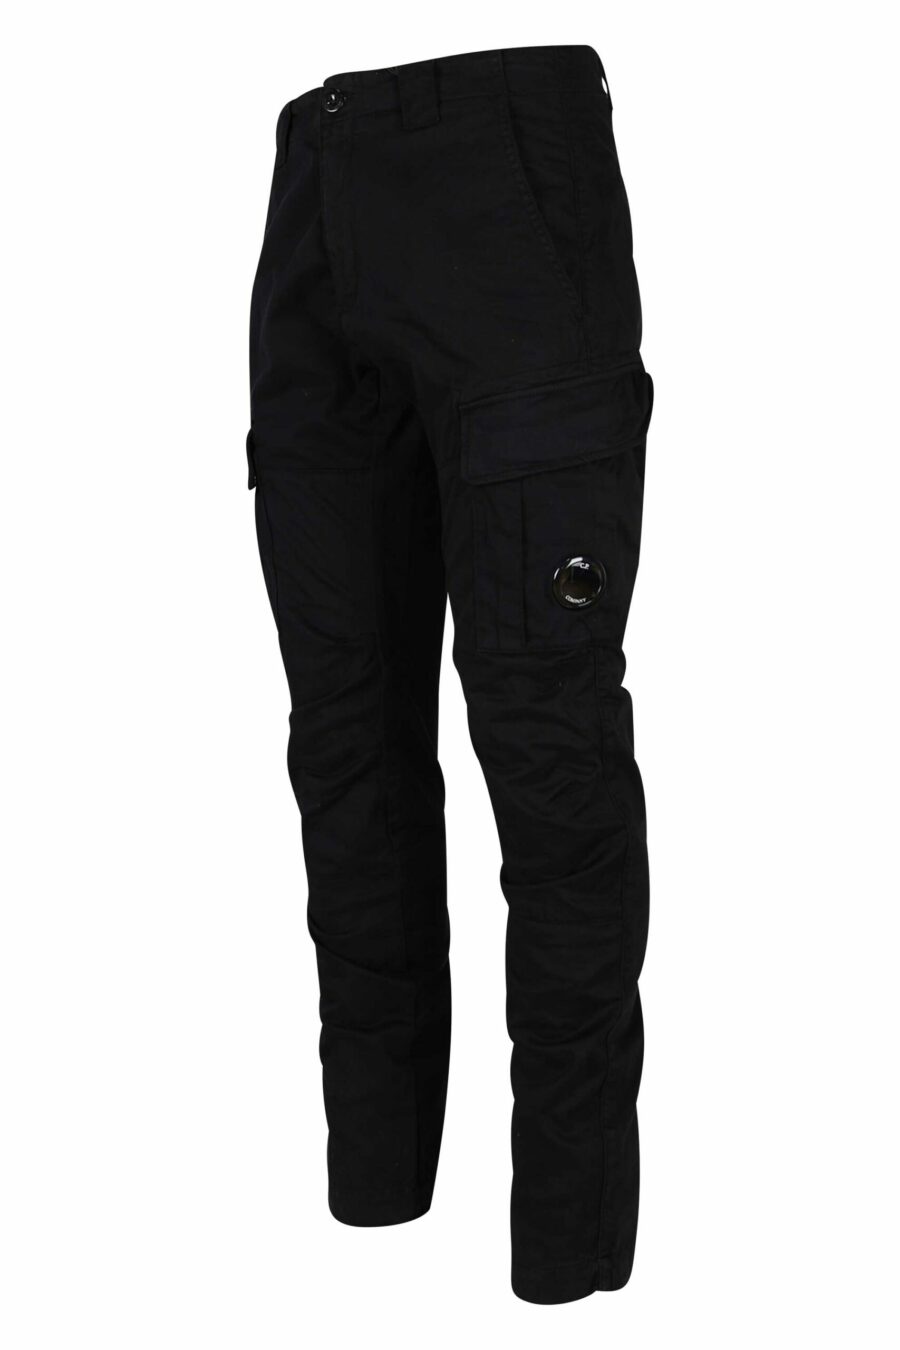 Black cargo trousers in stretch satin and logo lens - 7620943597585 1 1 scaled